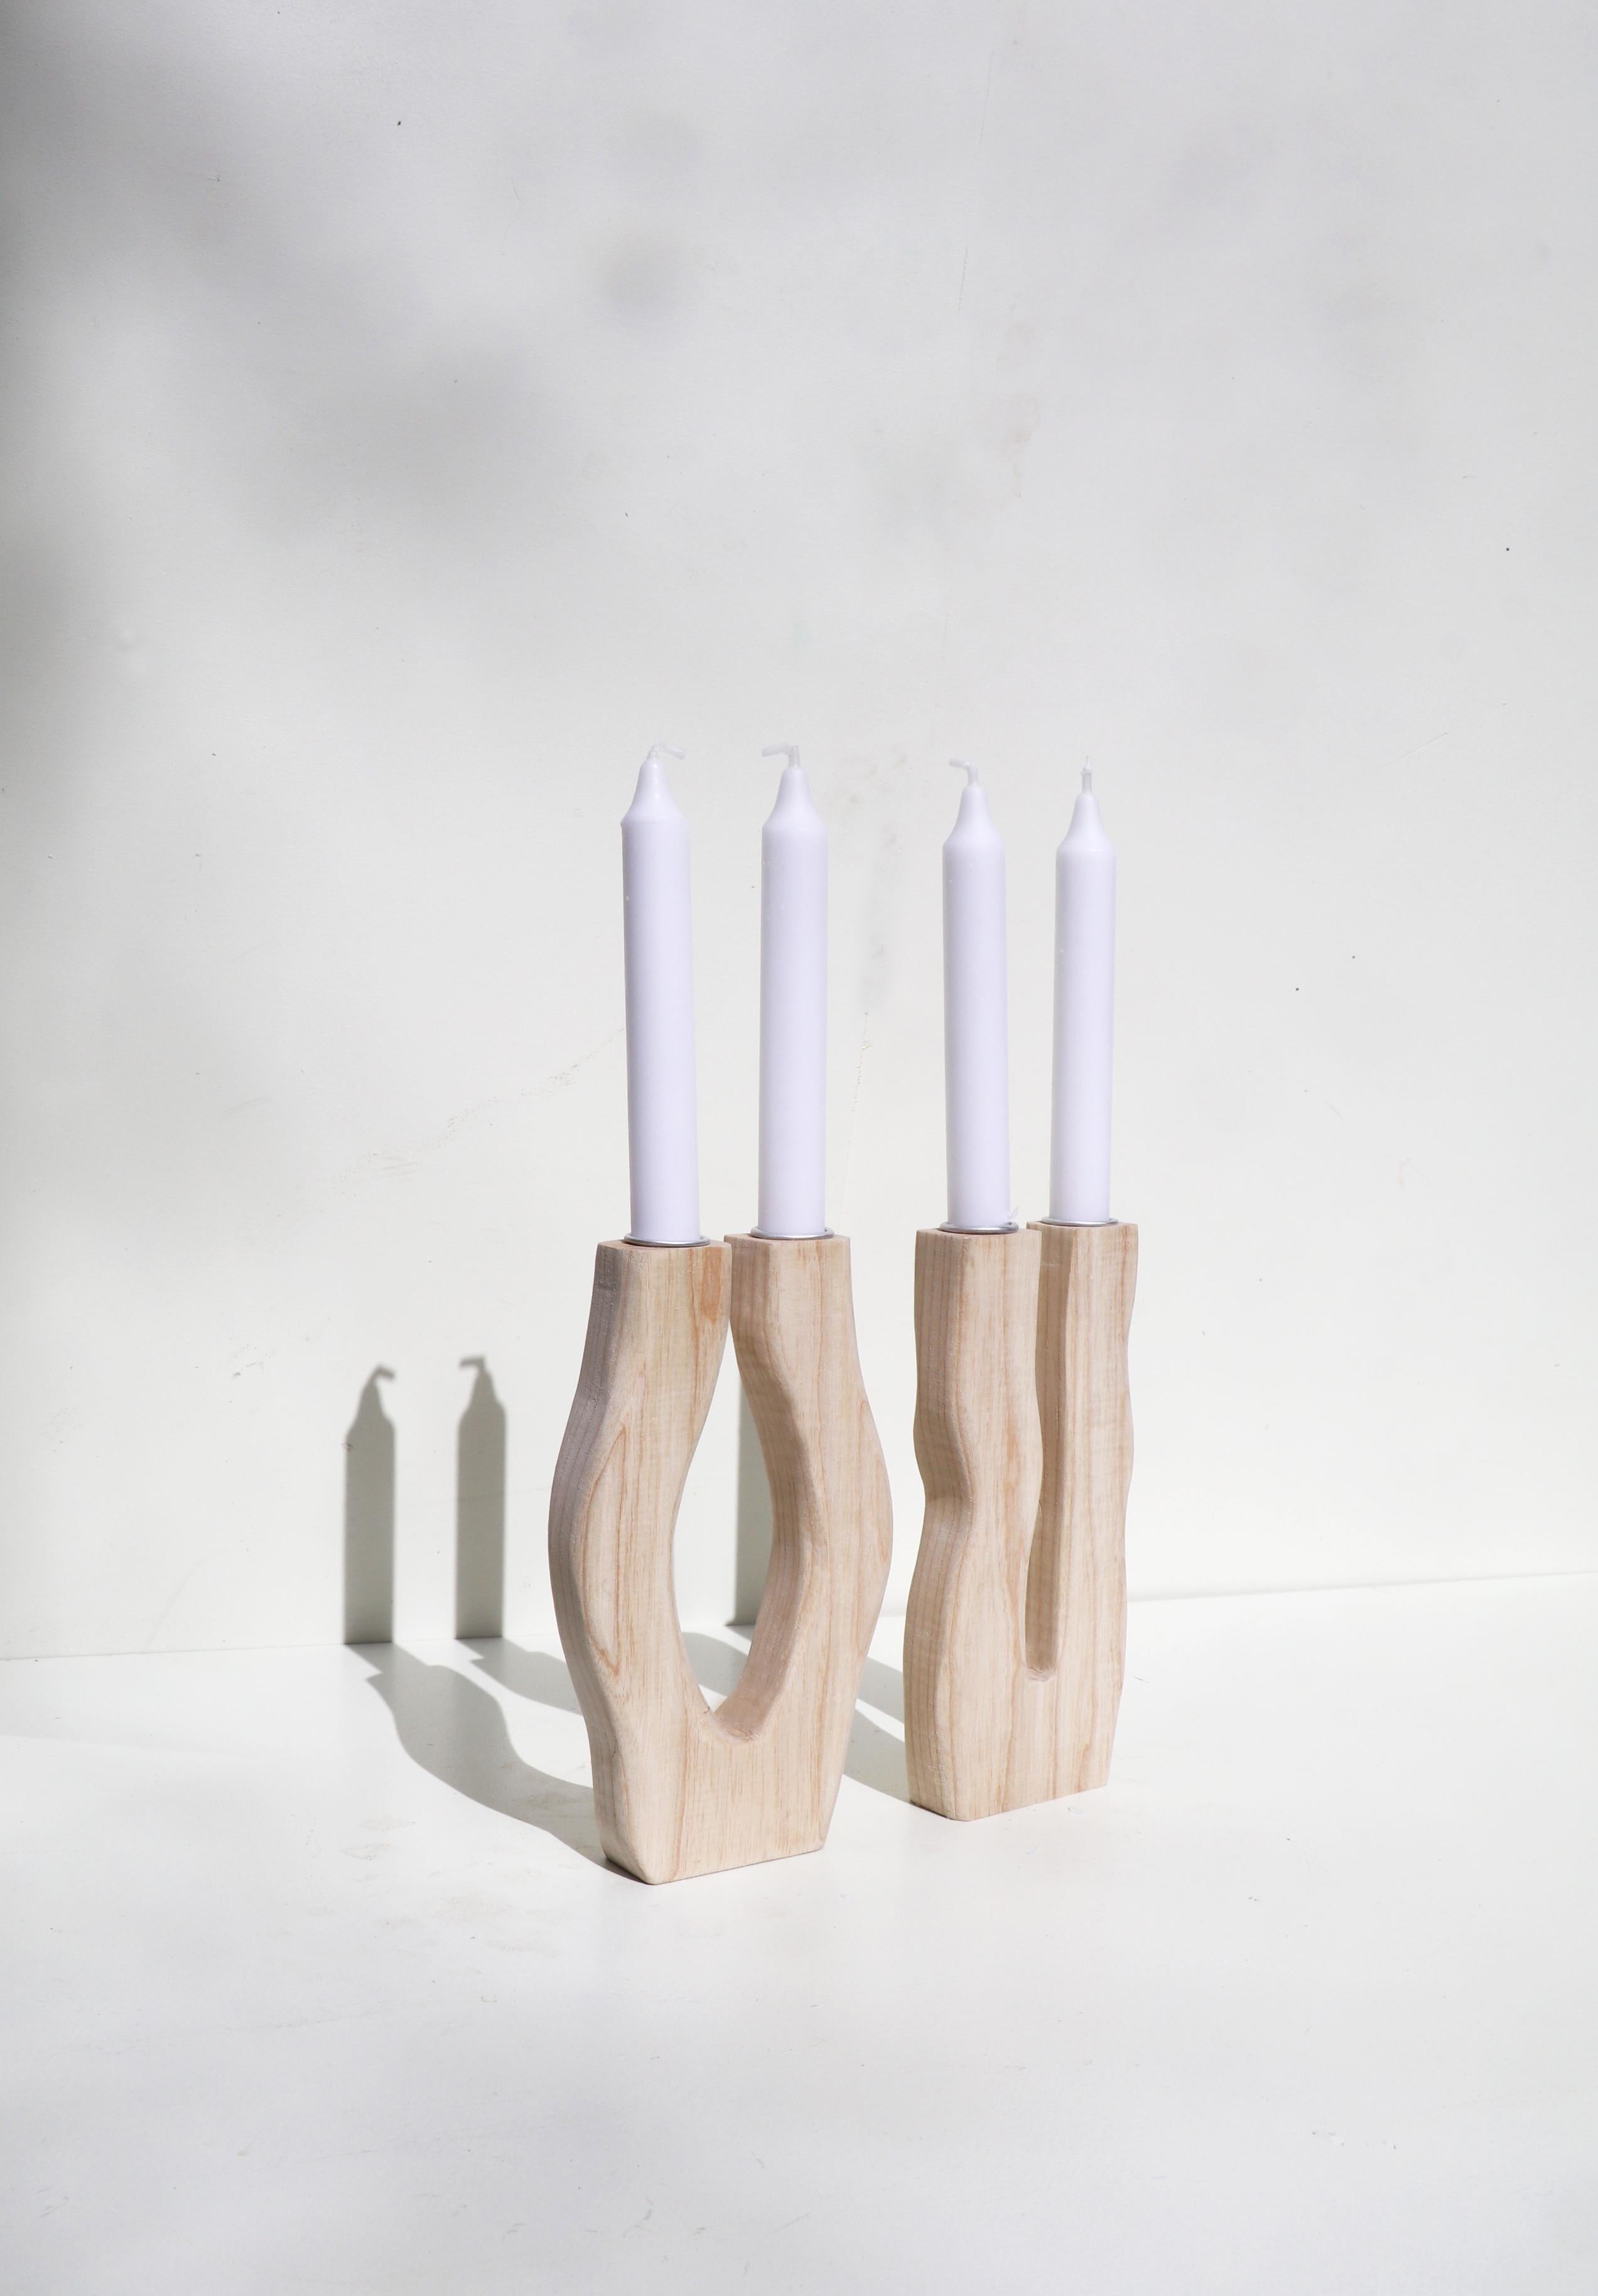 Set of 2 Swing & Arche Silhouette Candlesticks by Alice Lahana Studio
Dimensions: W 12 x D 5 x H 20 cm / W 9 x D 5 x H 20 cm
Materials: Franche-Comté ash

The candle holders are delivered without candles

Carved from ash, the Silhouette